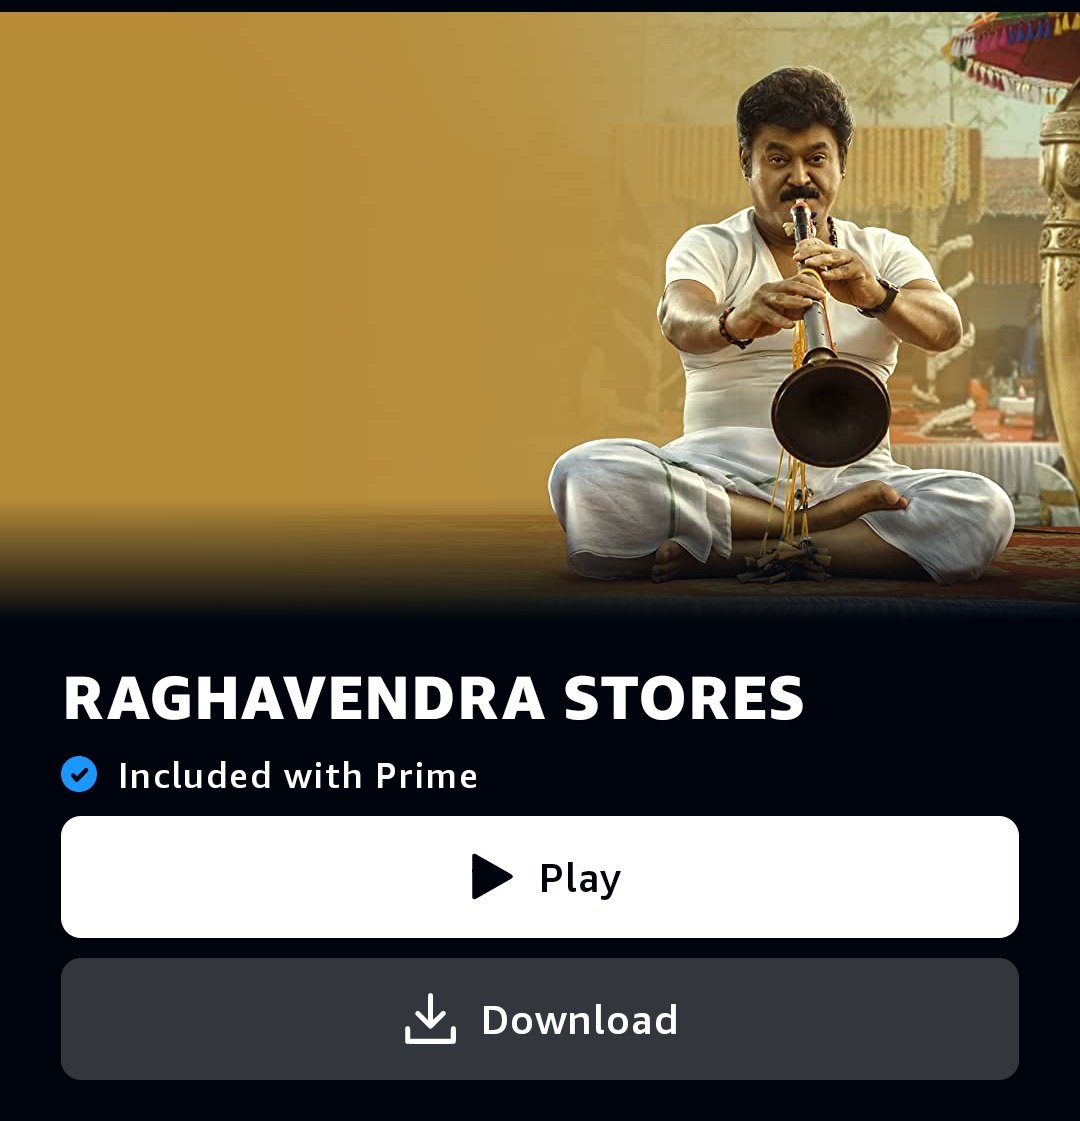 Finally a movie from Jaggesh without double meaning. This will be a good hit with family entertainer..😊
#RaghavendraStores